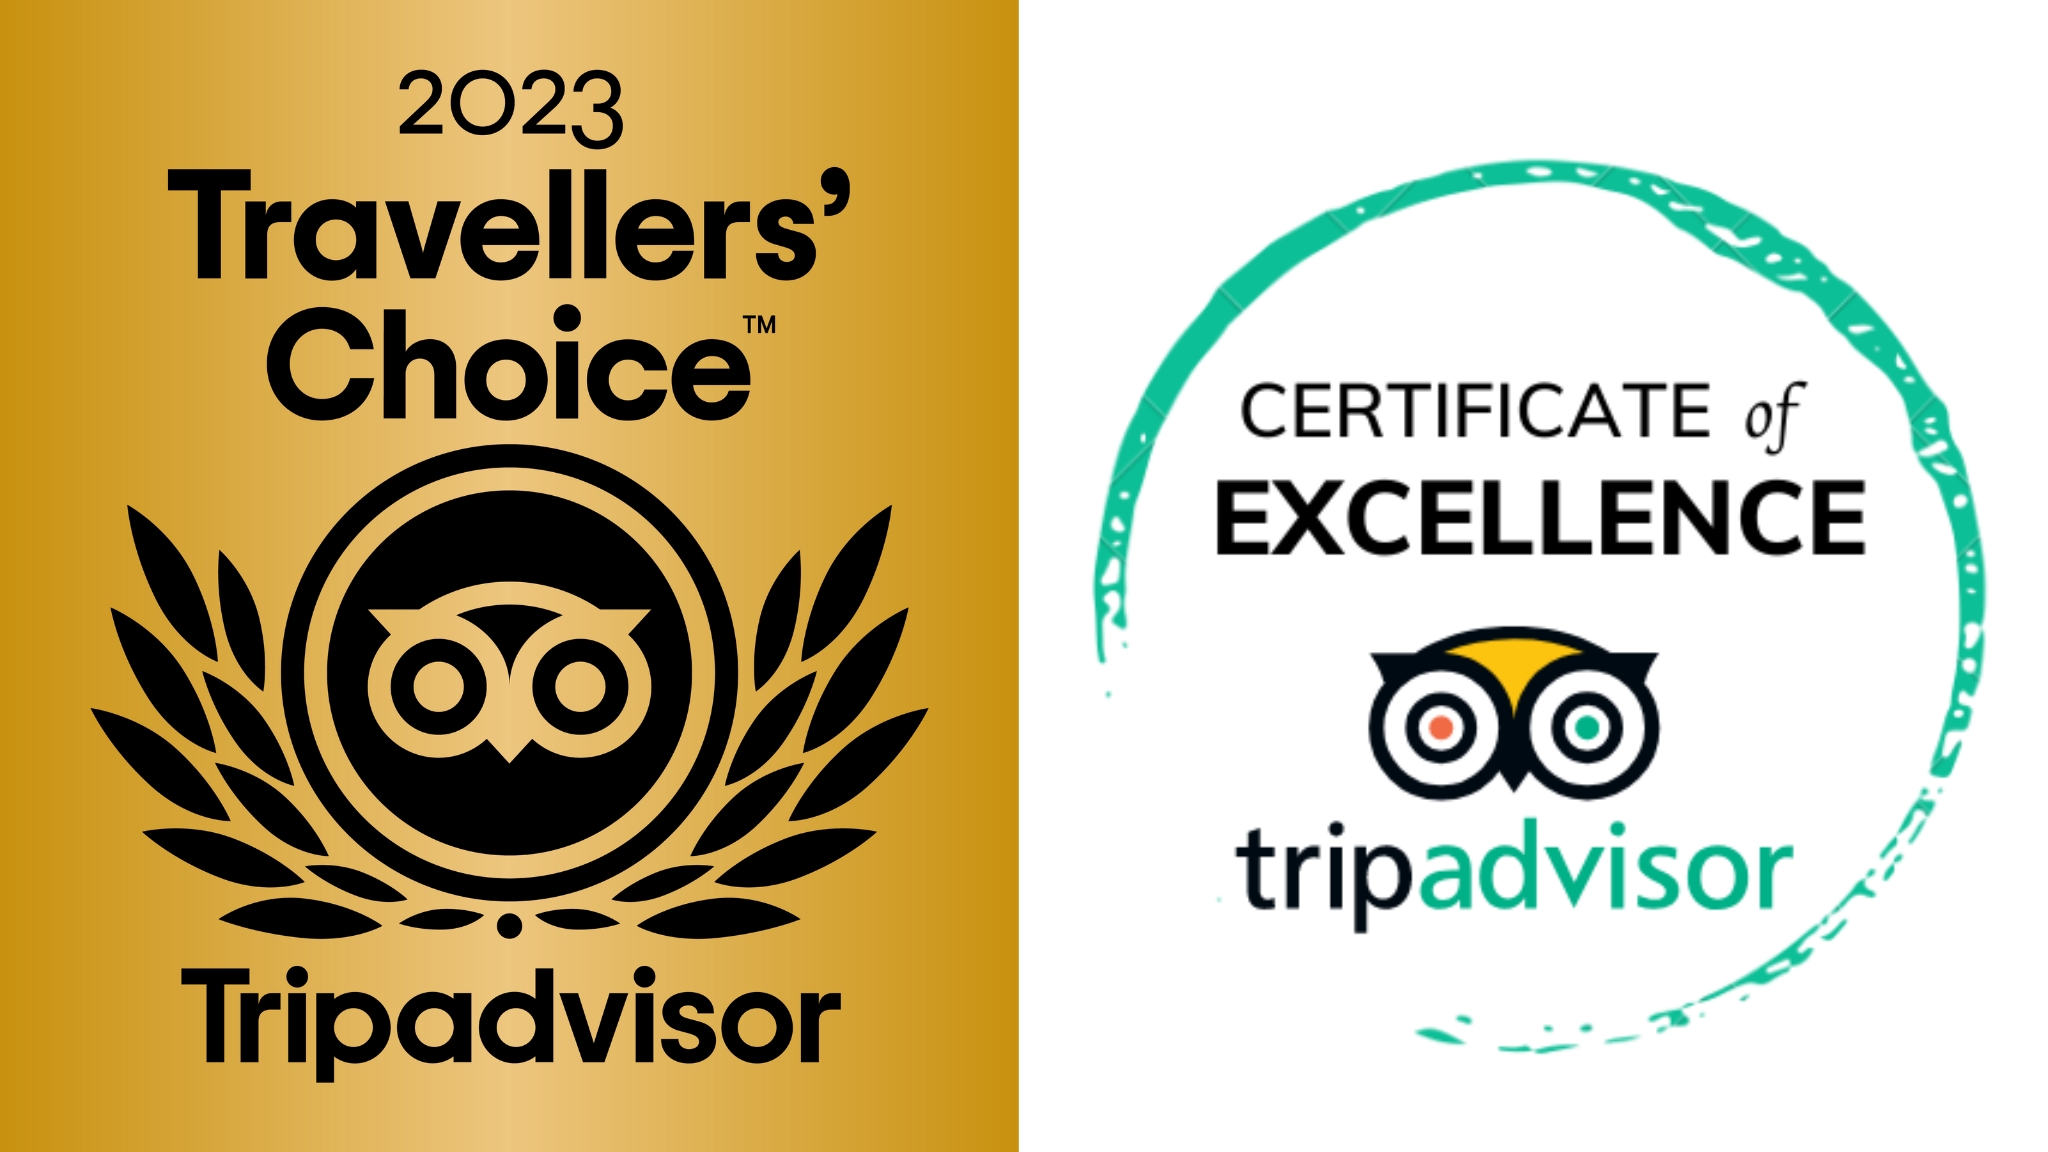 Certificate of Excellence and Travelers’ Choice Award are two significant milestone to any travel agency